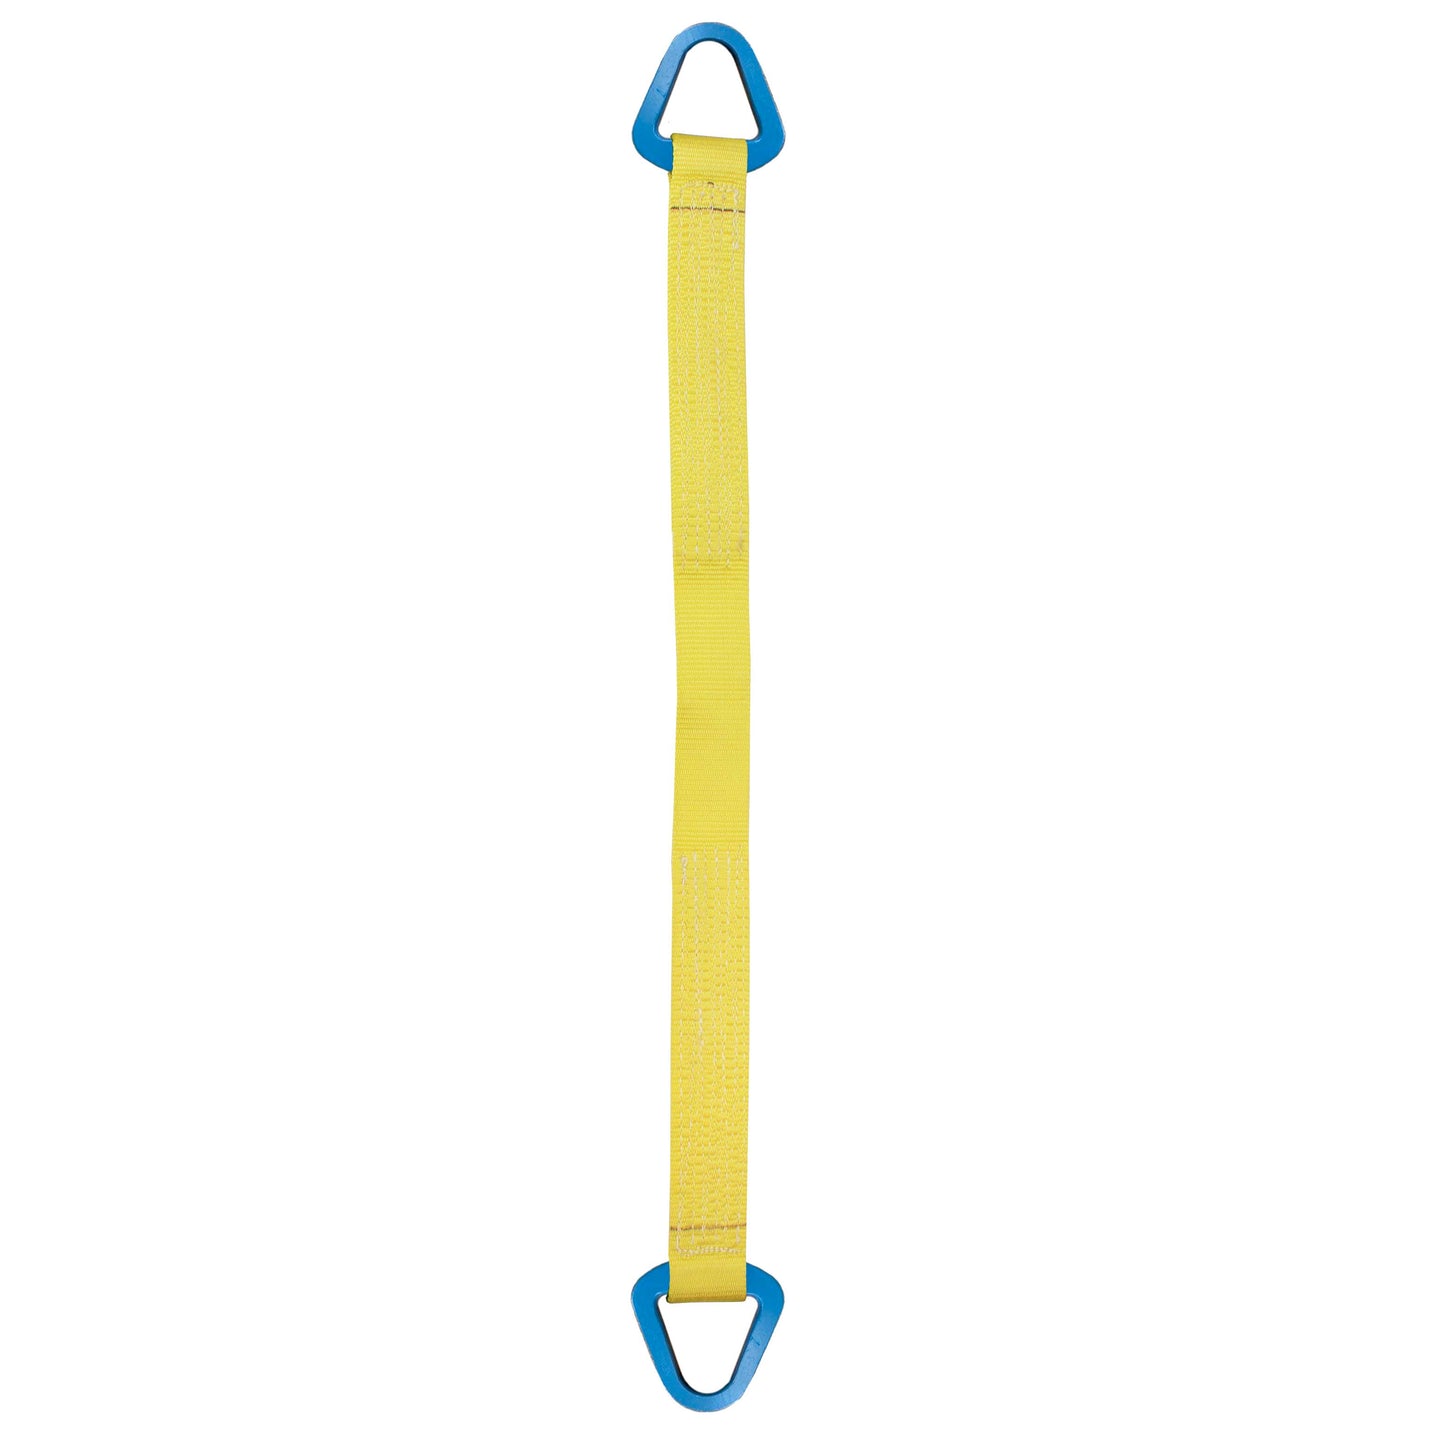 Nylon Lifting Sling Triangle 12 inch x 4 foot 1ply image 1 of 2